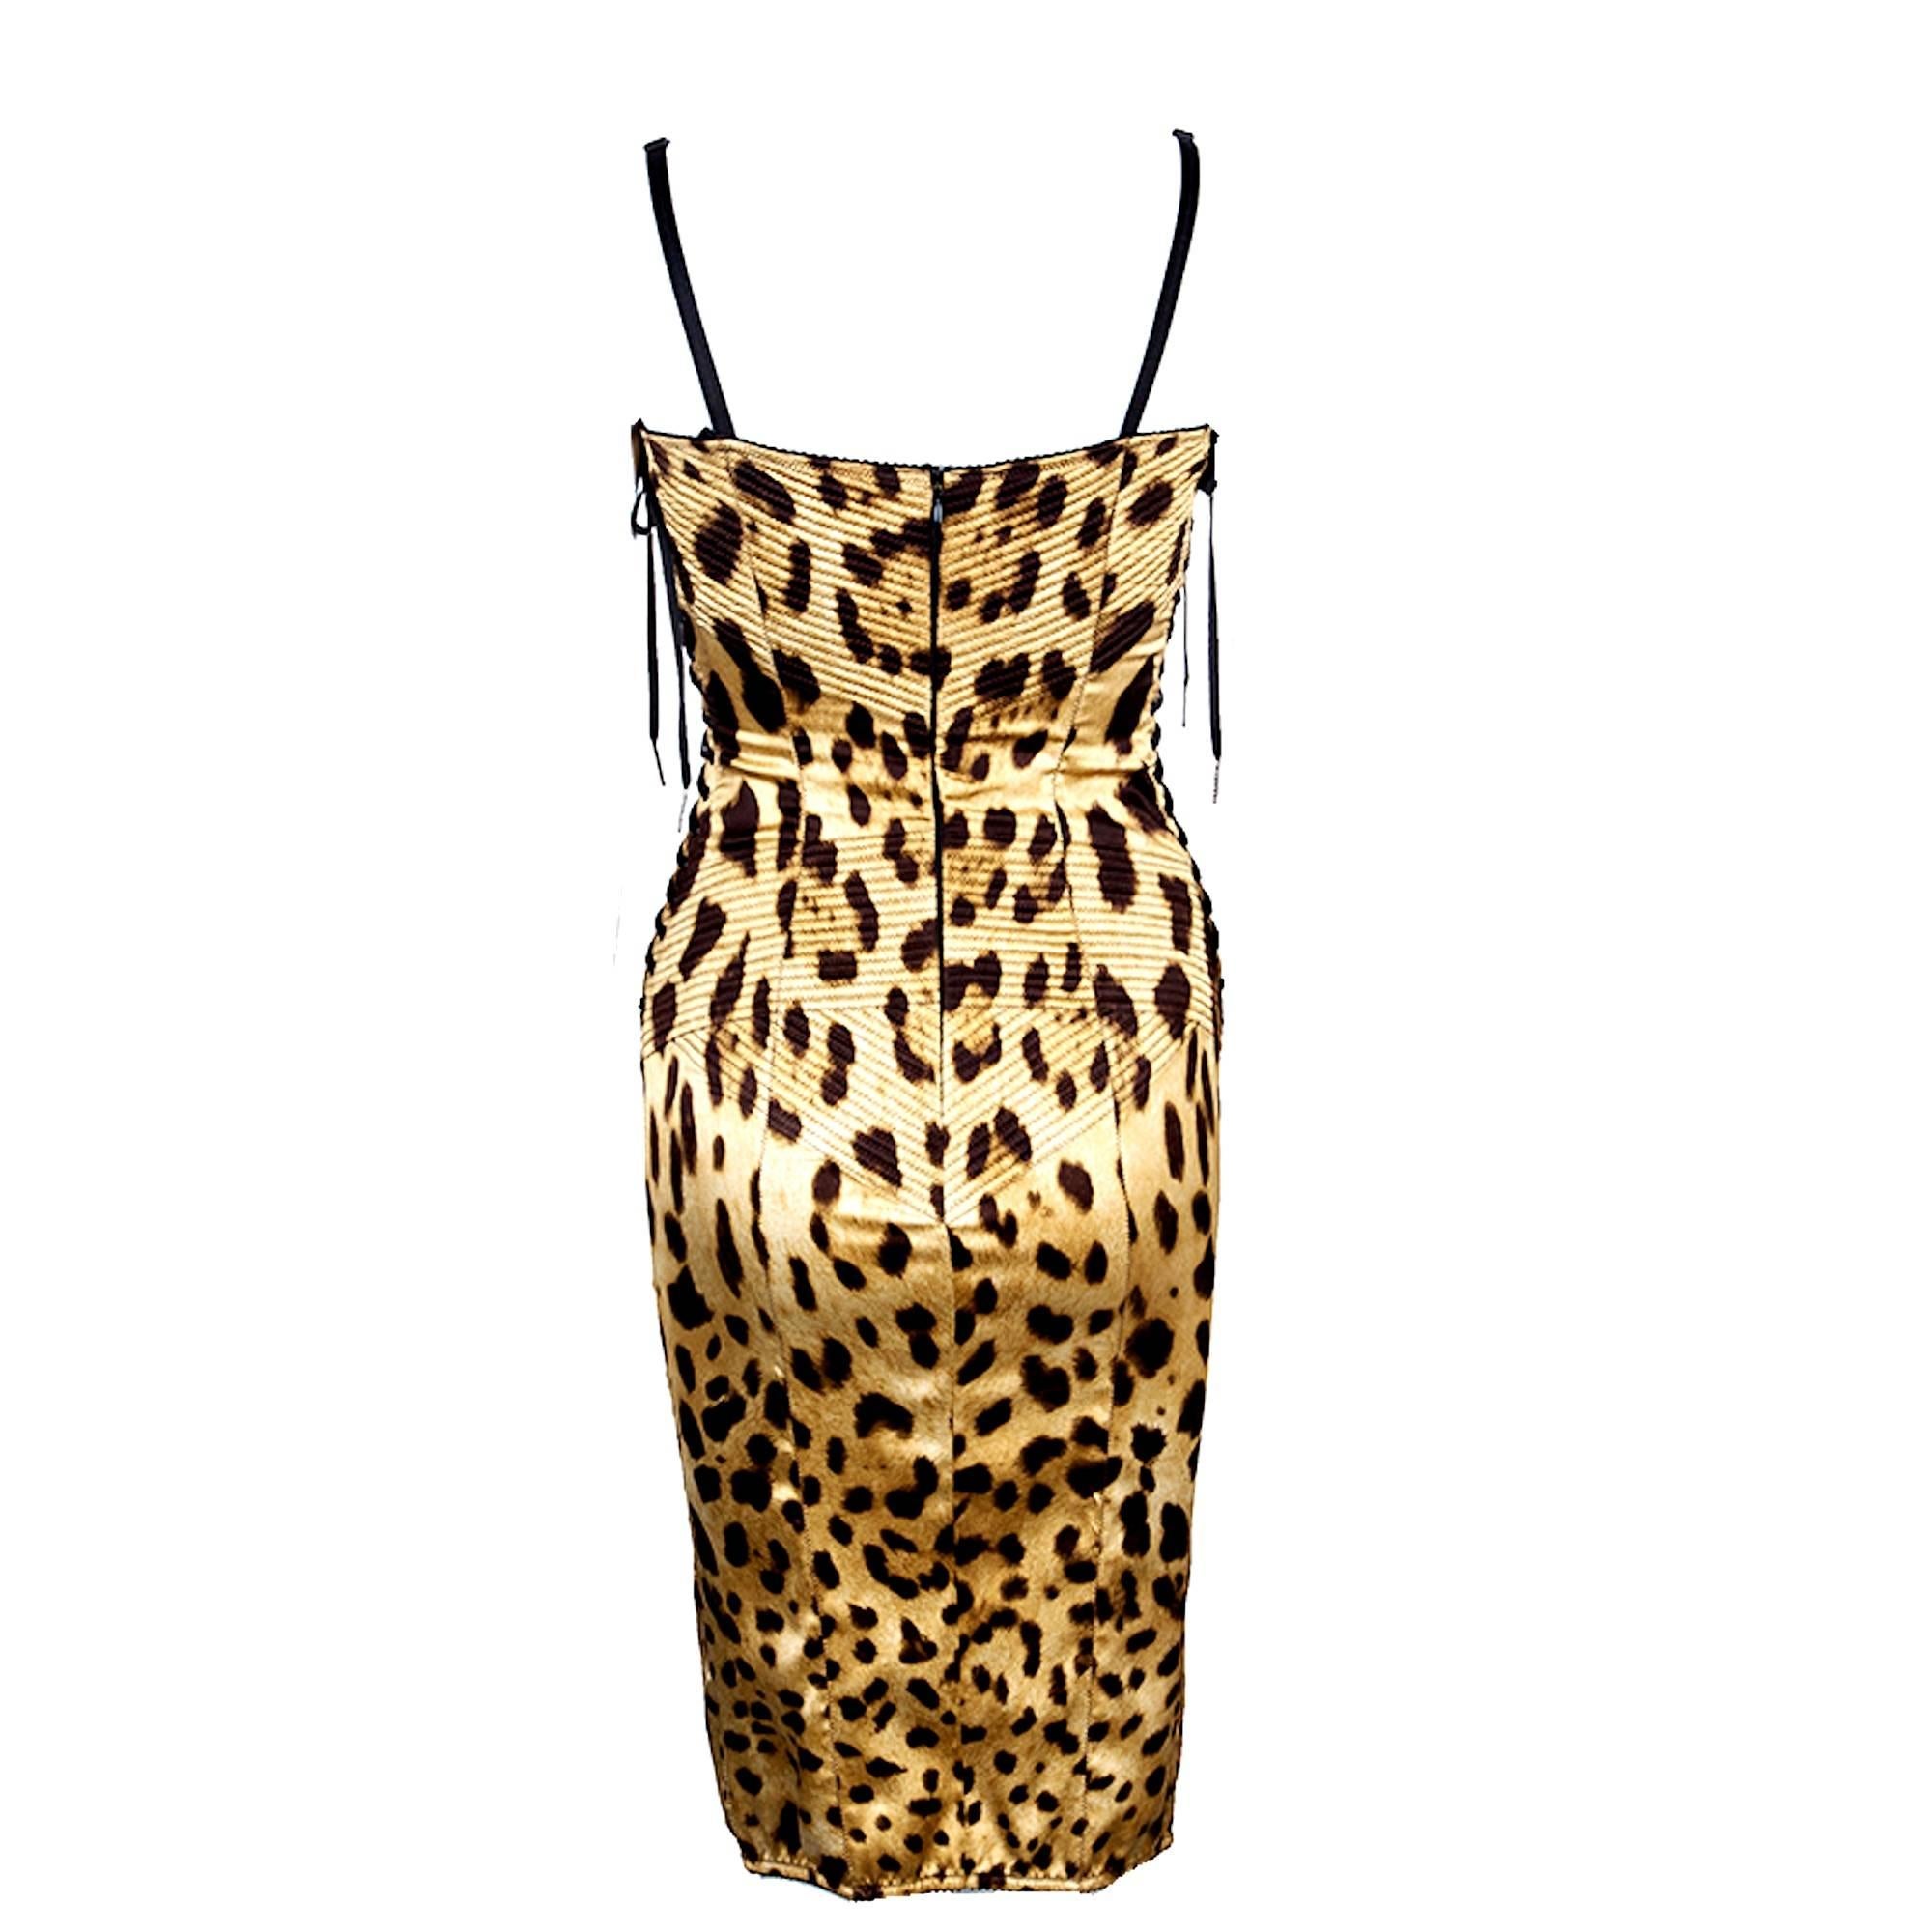 BREATHTAKING

DOLCE & GABBANA

LEOPARD ANIMAL PRINT CORSET DRESS

COLLECTOR'S PIECE

SEEN ON VICTORIA SILVSTEDT

DETAILS:

    A DOLCE & GABBANA classic signature piece that will last you for years
    Beautiful leopard printed silk
   